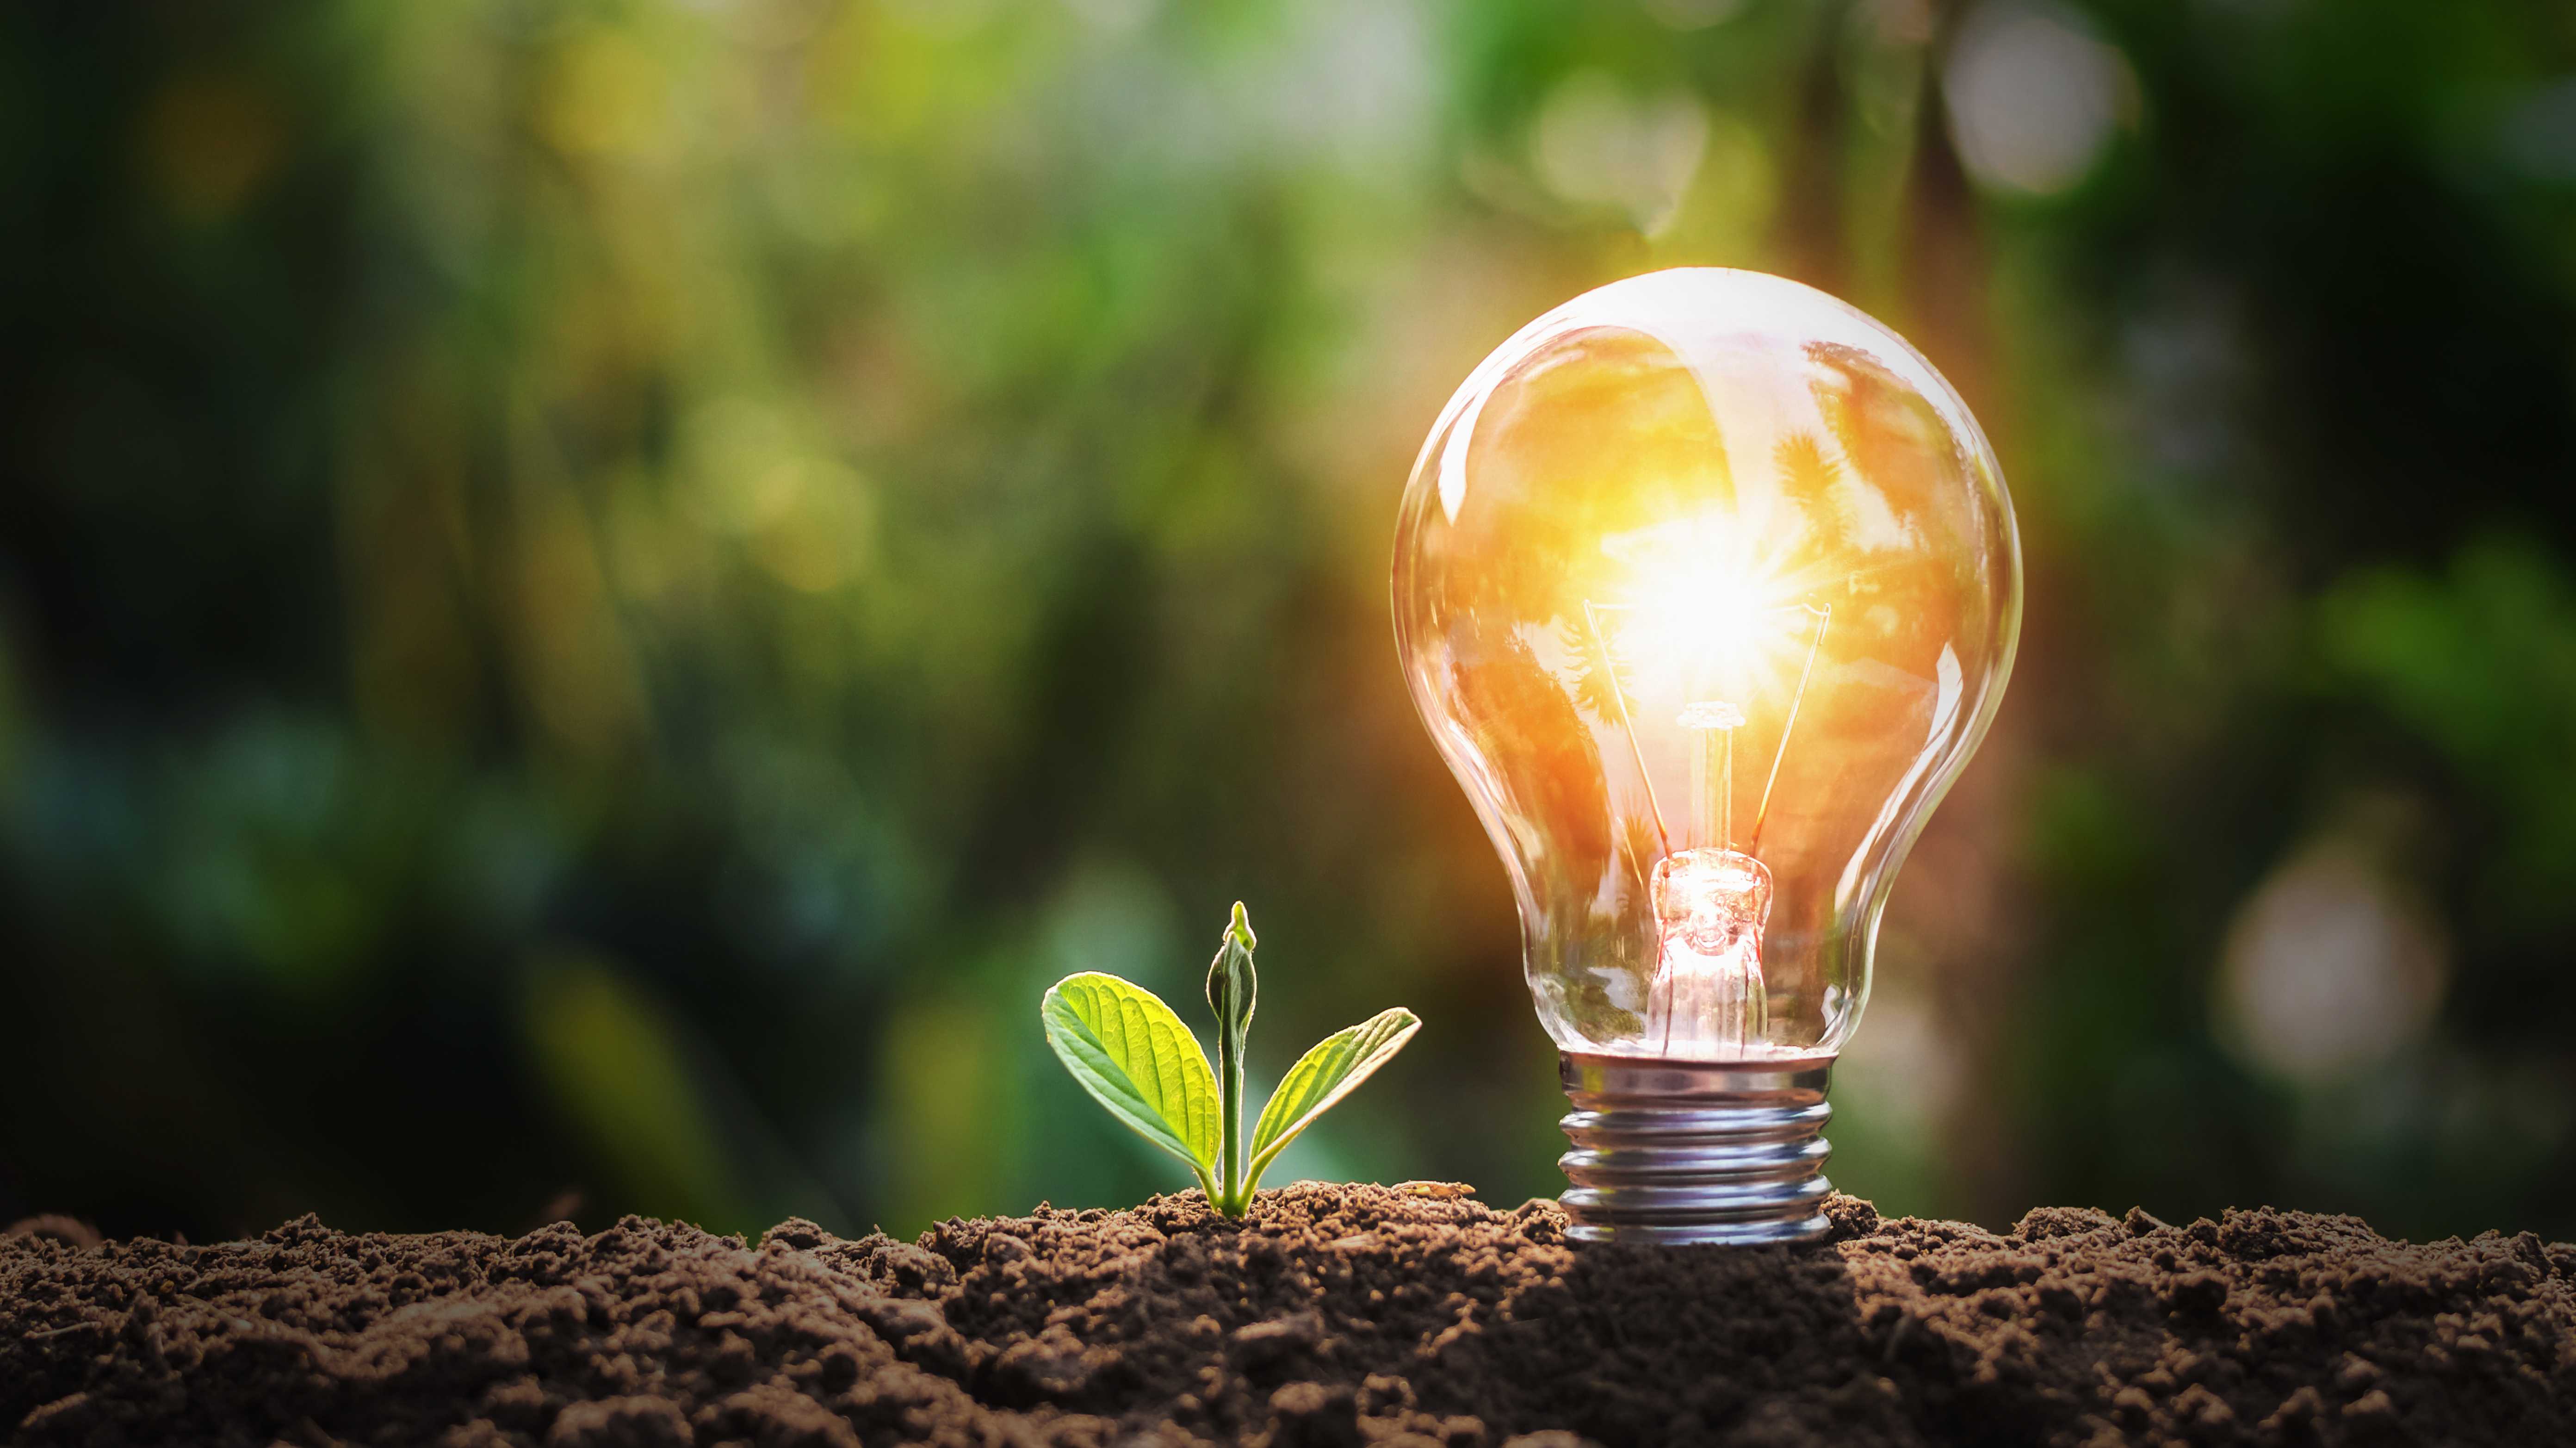 Lightbulb,With,Small,Plant,On,Soil,And,Sunshine.,Concept,Saving